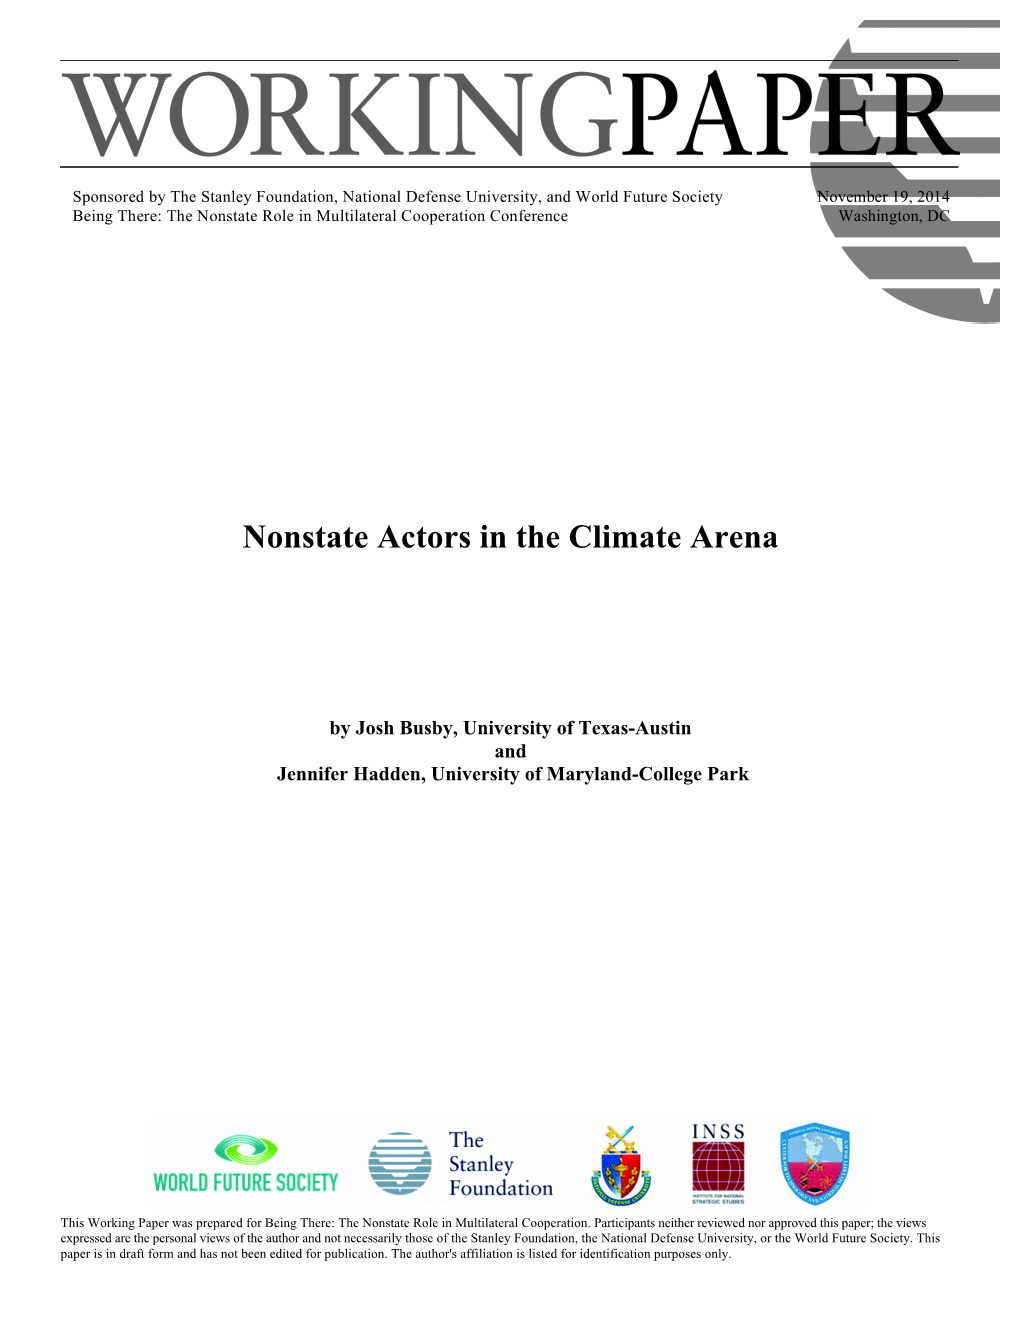 Nonstate Actors in the Climate Arena